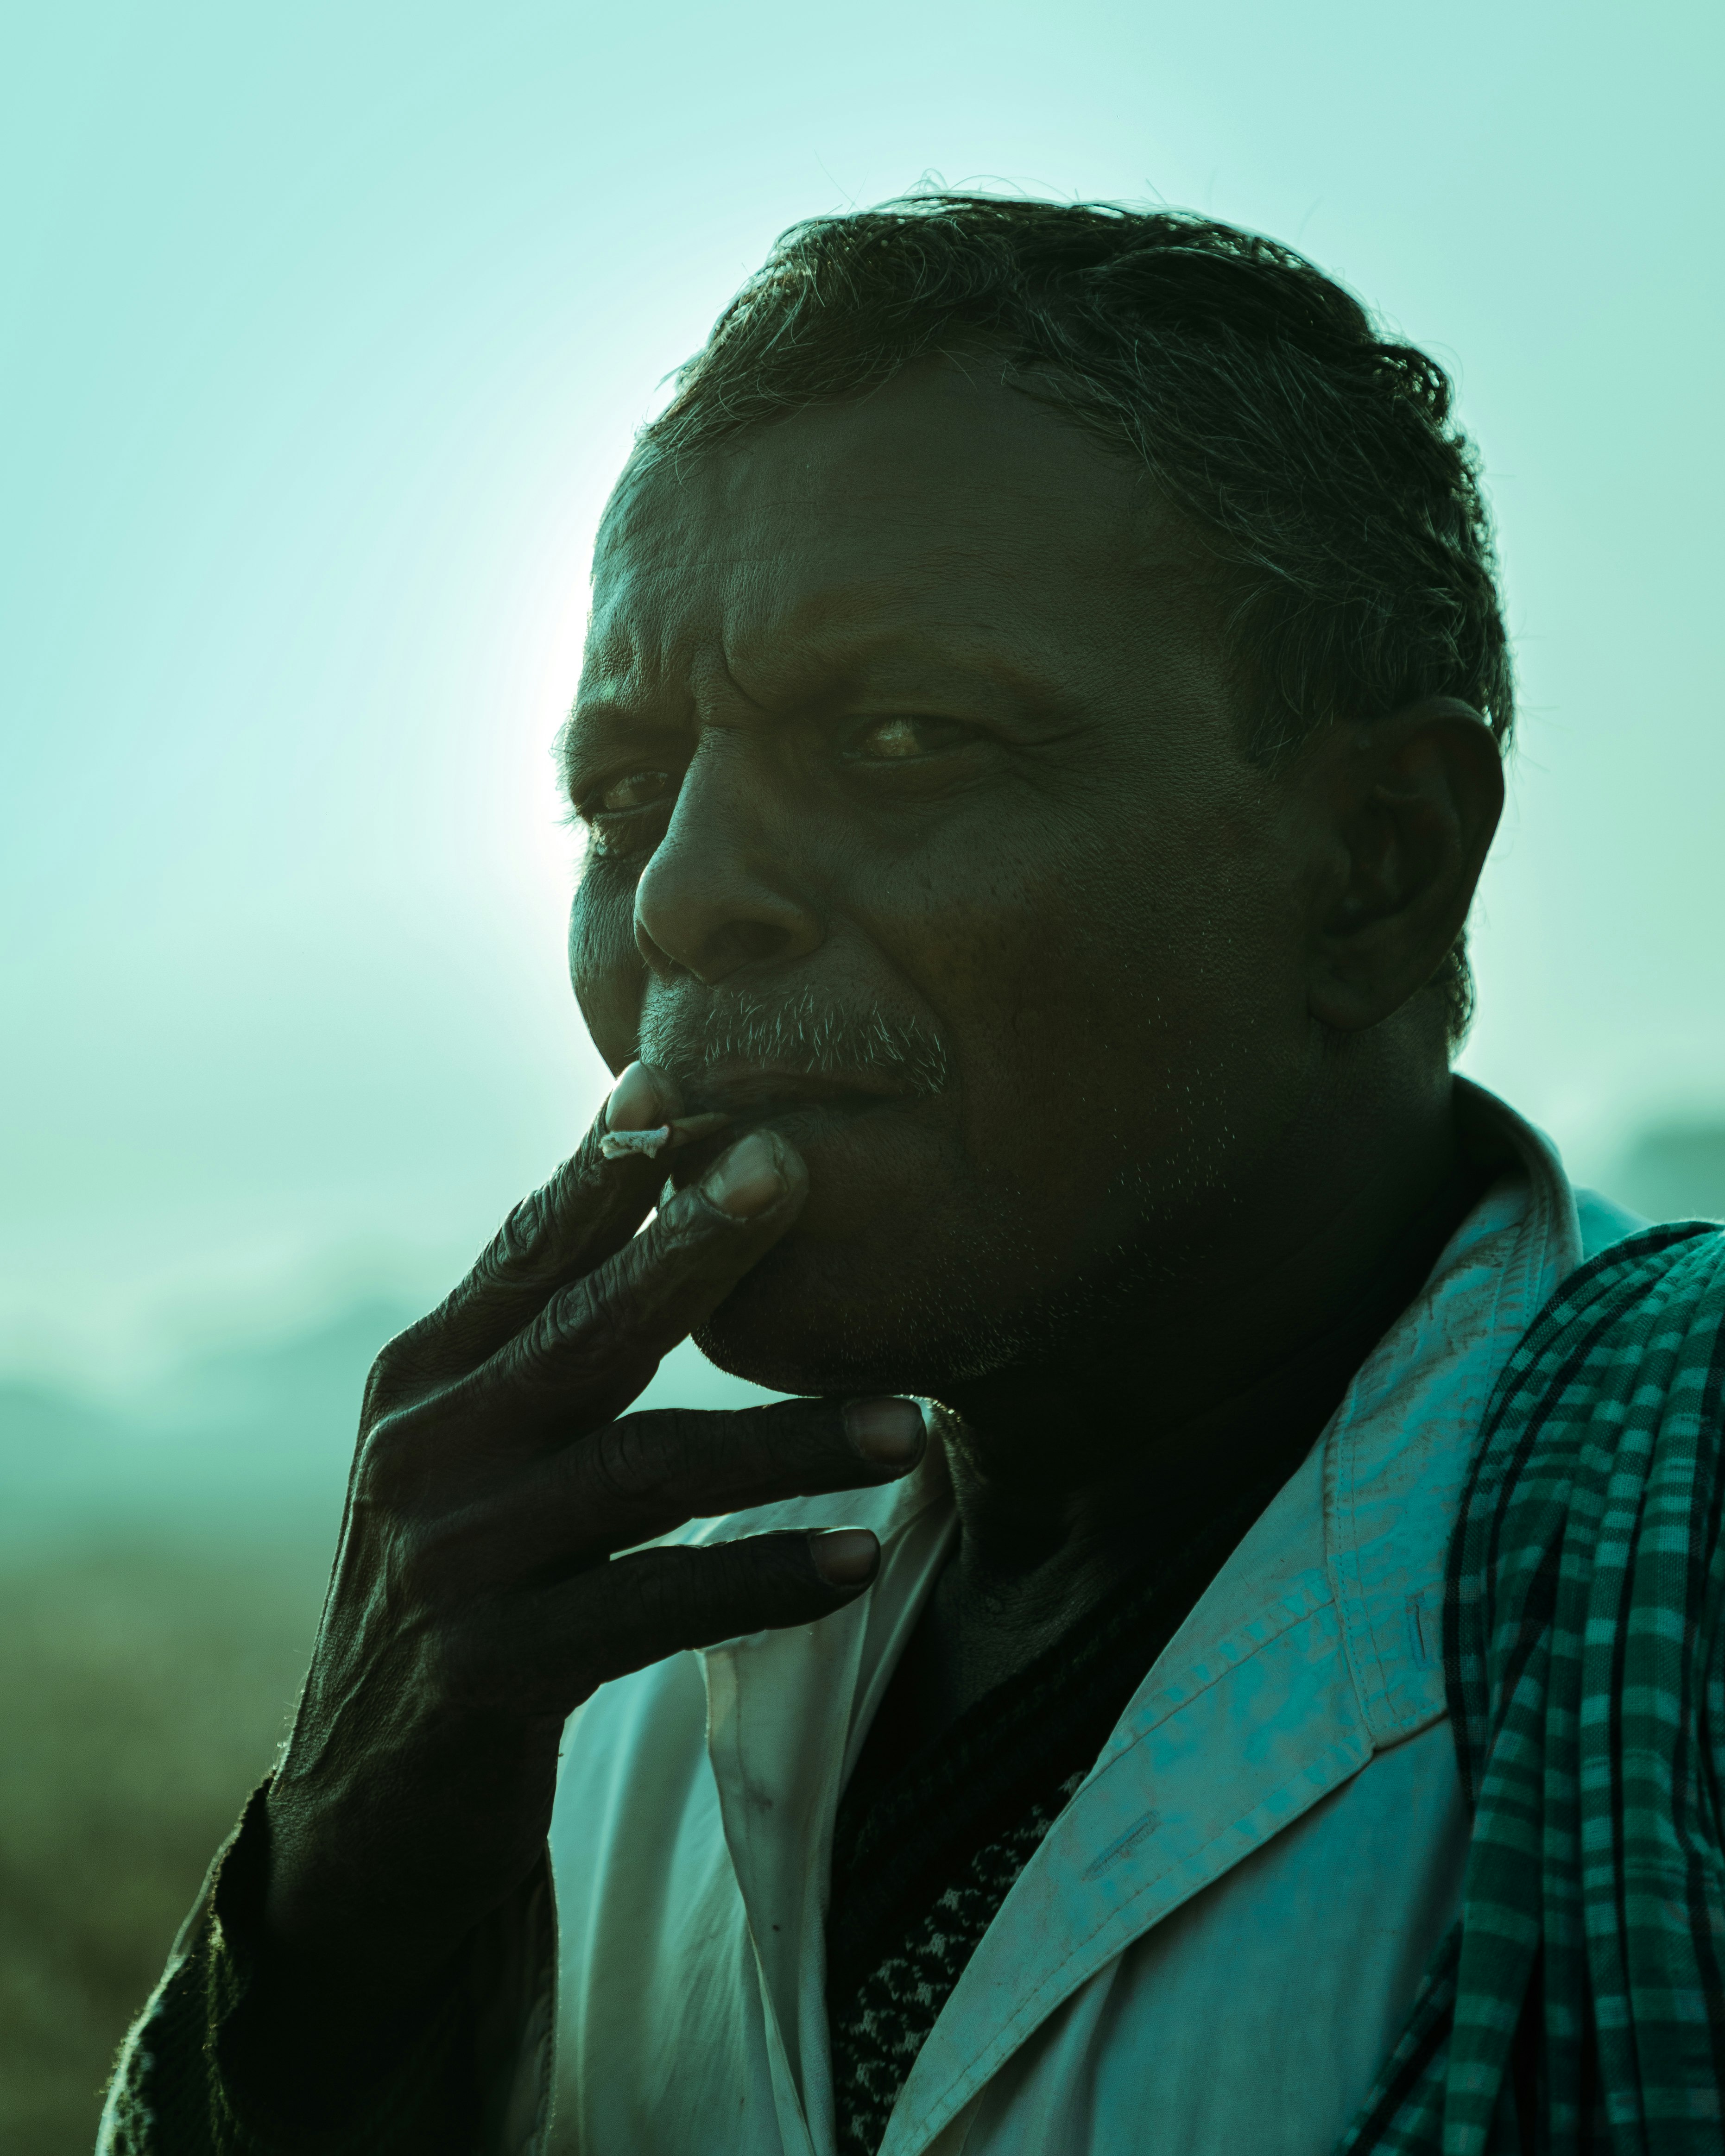 An Indian farmer taking a smoke break from his daily work. 